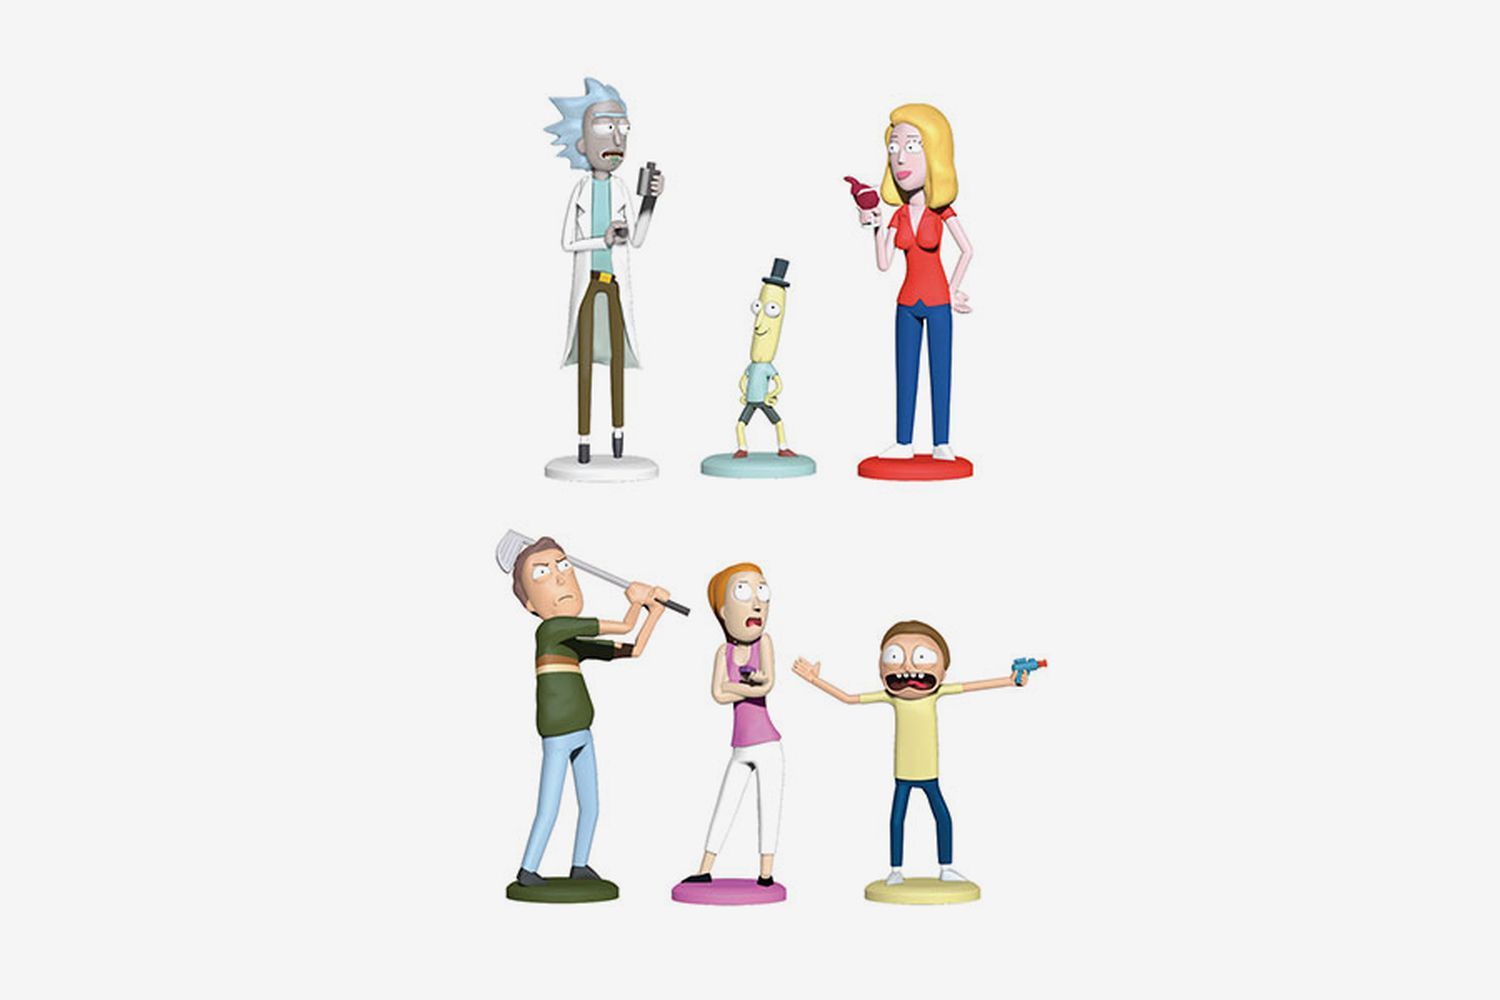 Clue: Rick and Morty